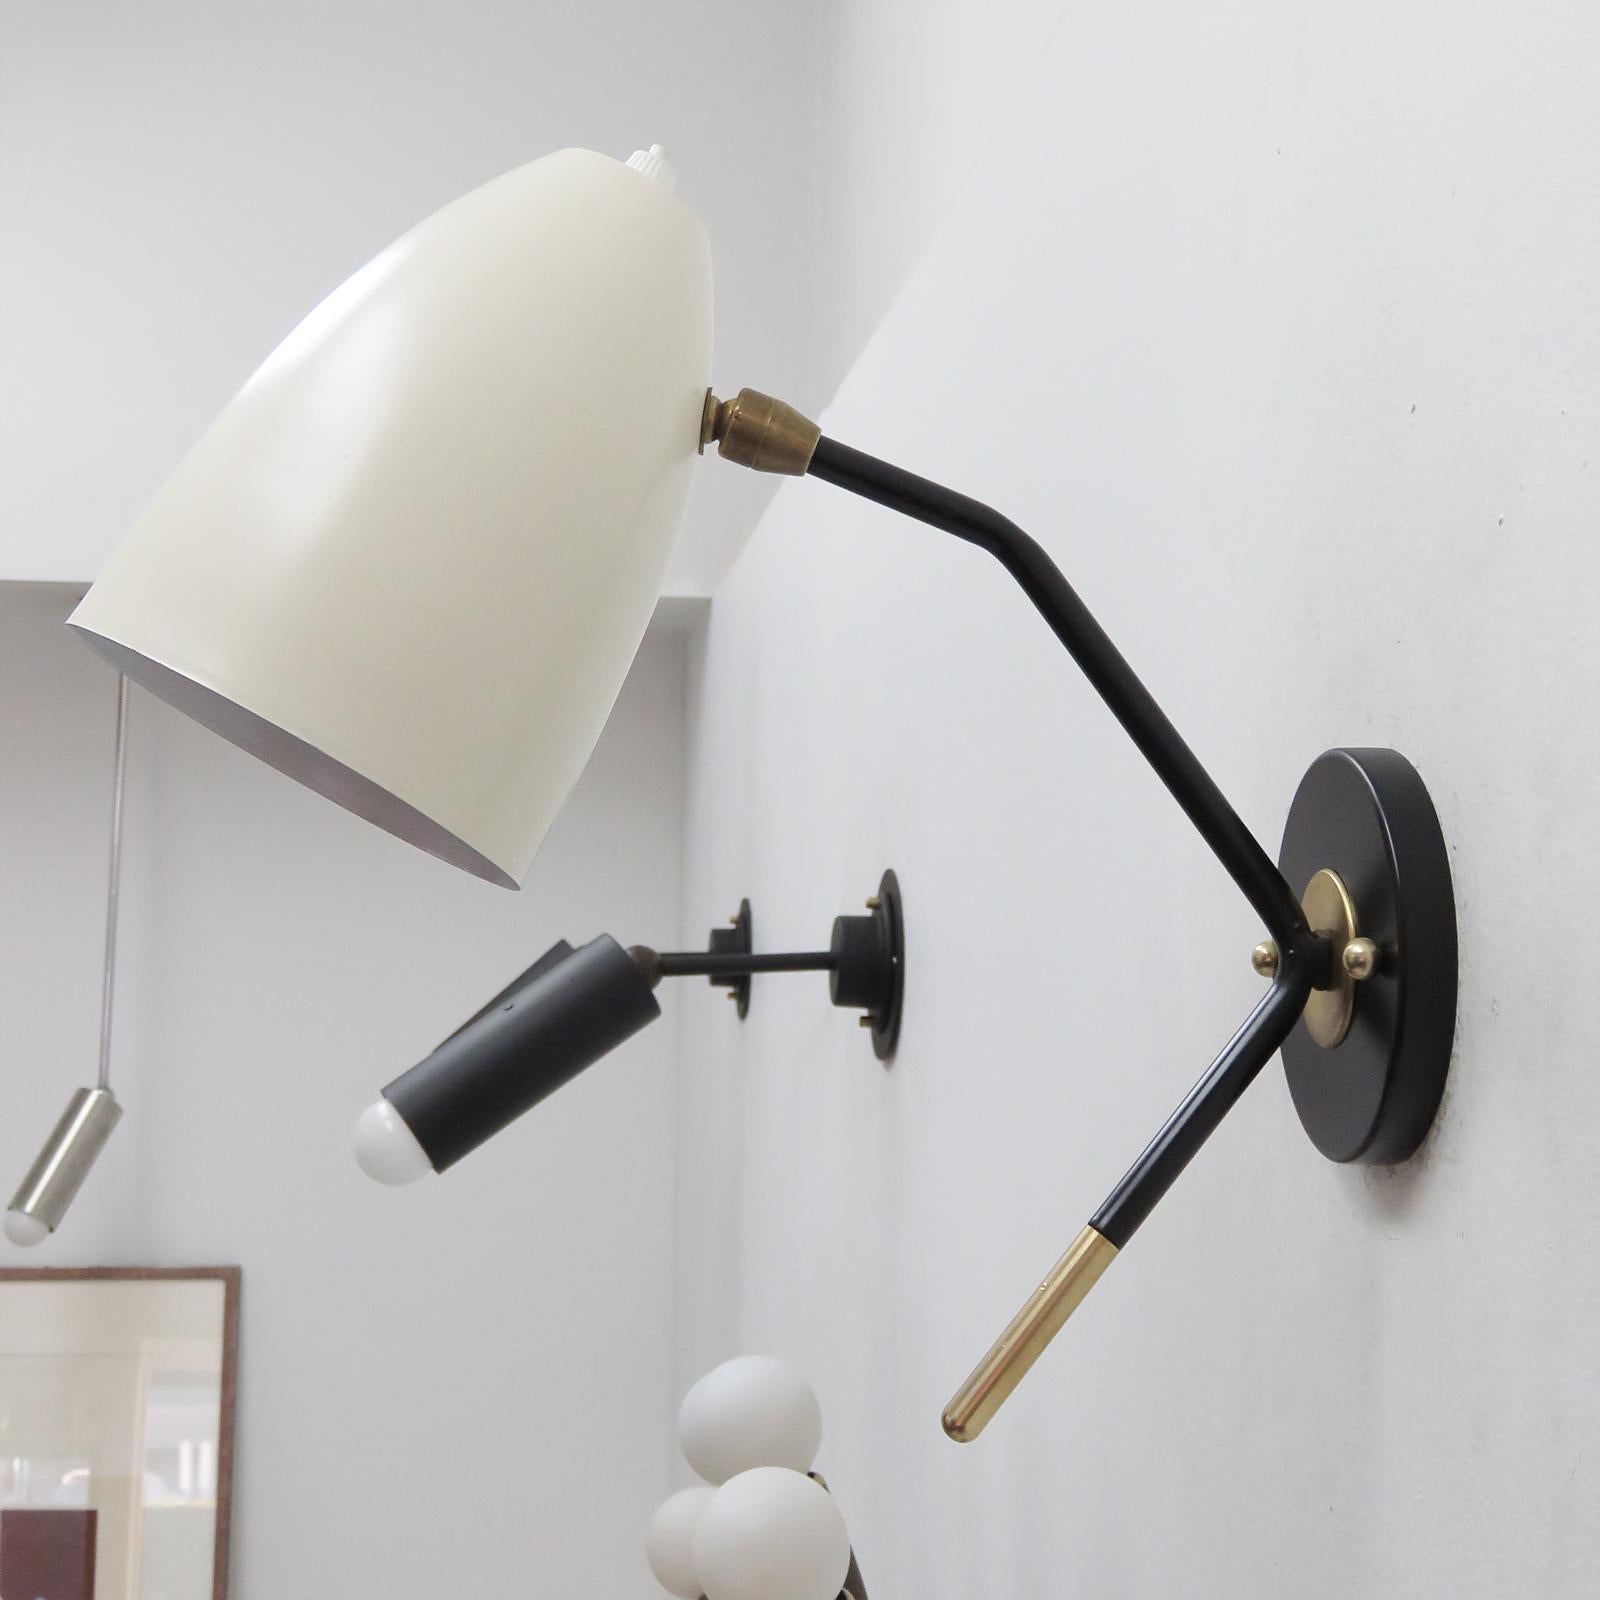 Wonderful two-tone LE-1 wall lights with fully adjustable two tone brass shades (egg shell with white enameled interiors) on black enameled arms with decorative brass tips, each shade has an individual on and off switch. One E26 socket per fixture,